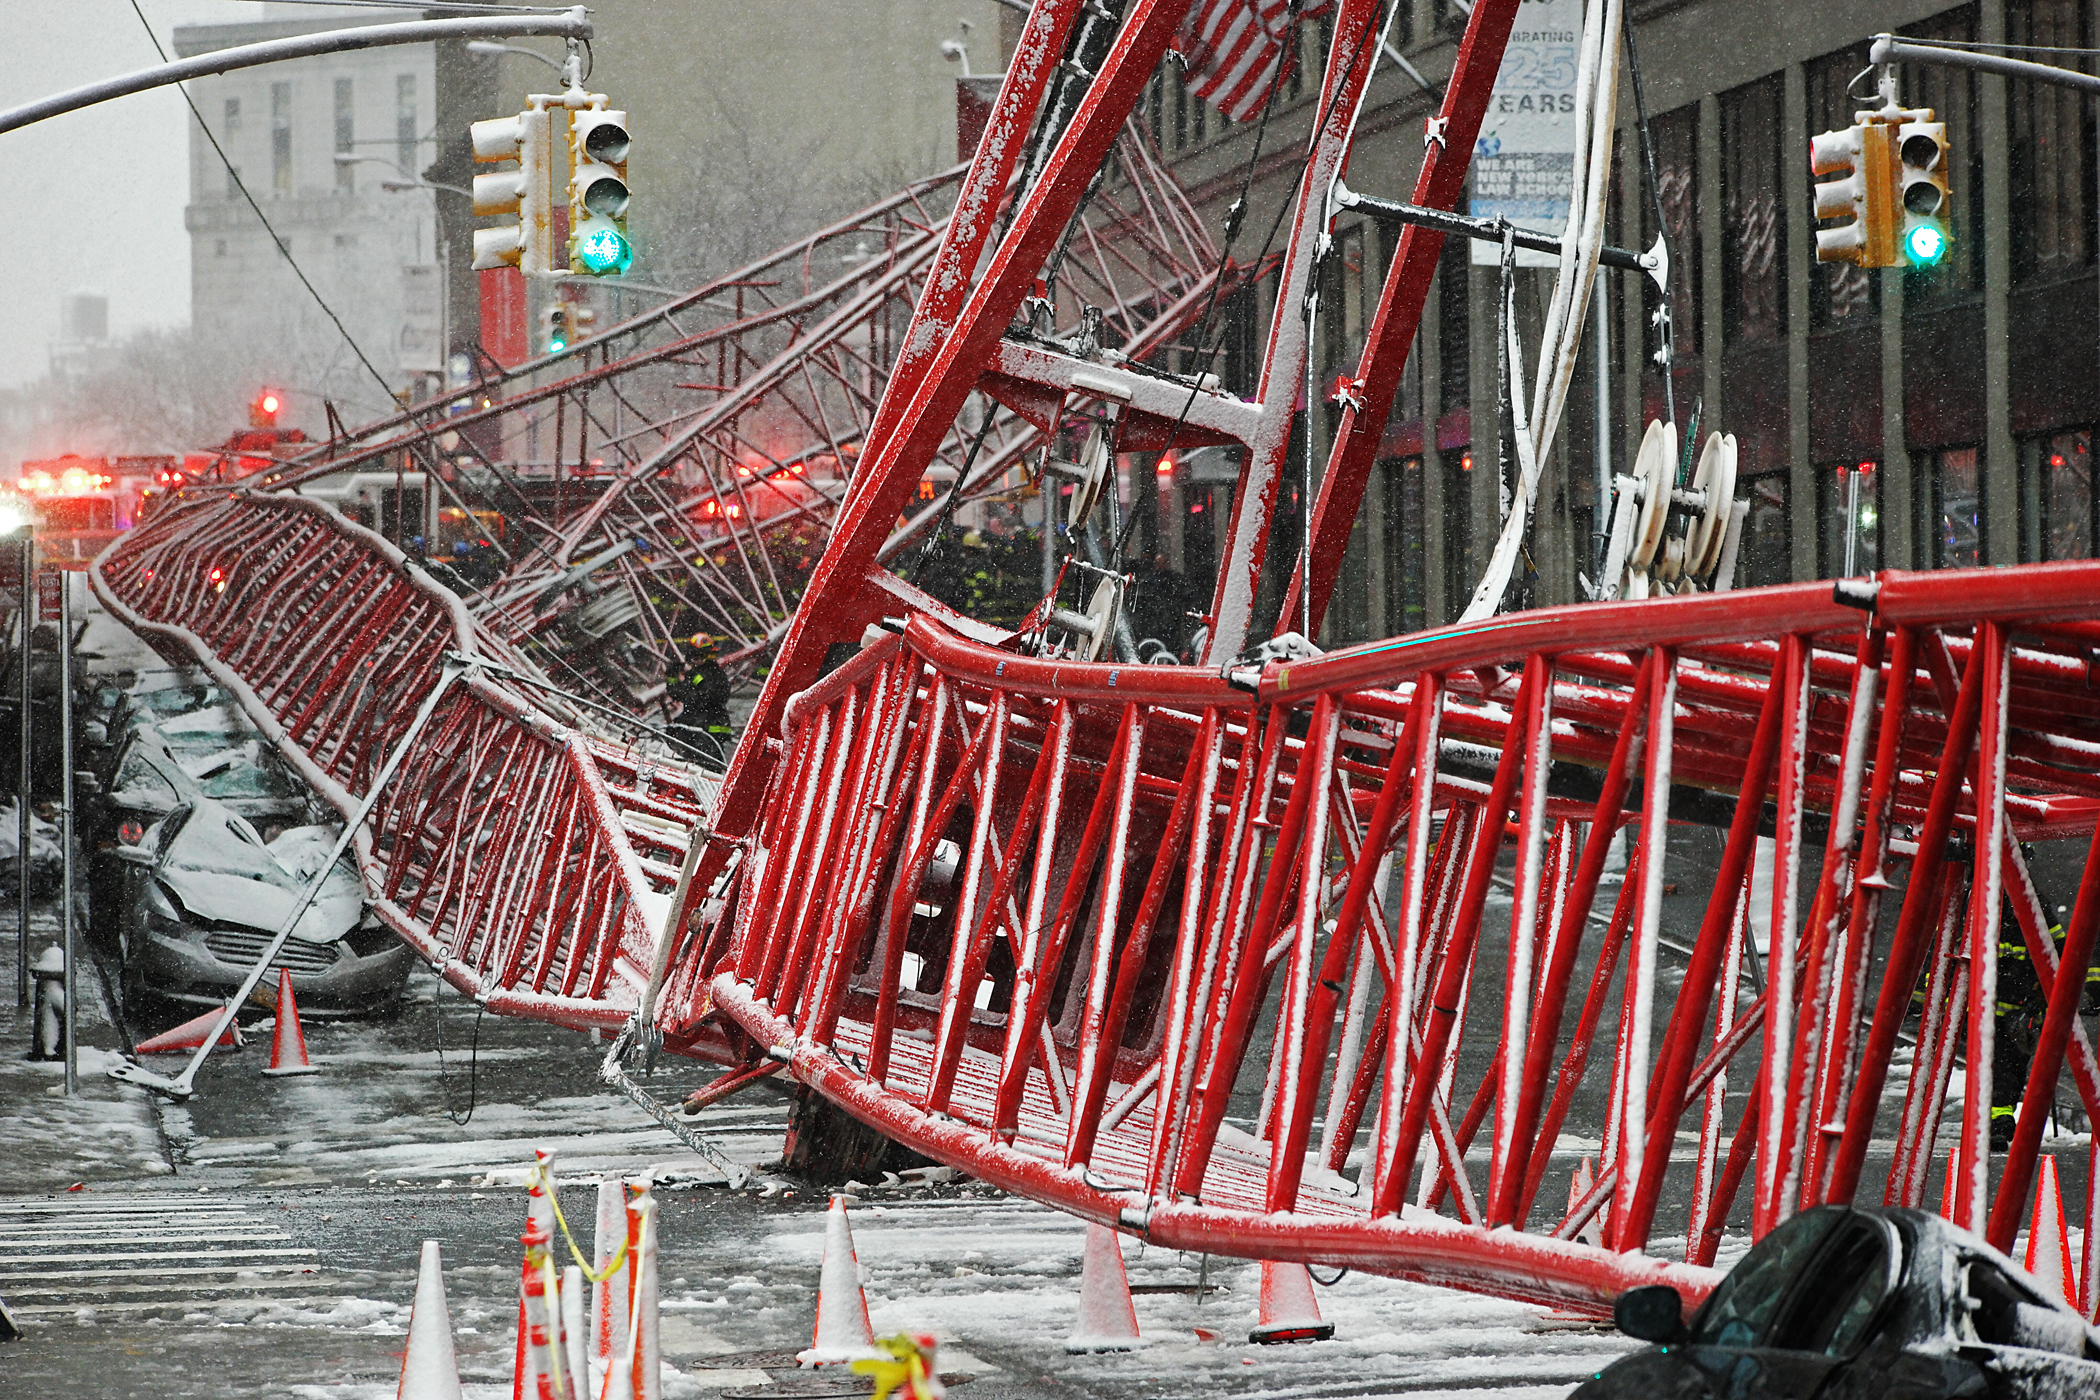 by Milo Hess The falling crane killed one person and crushed several cars parked along Worth St.